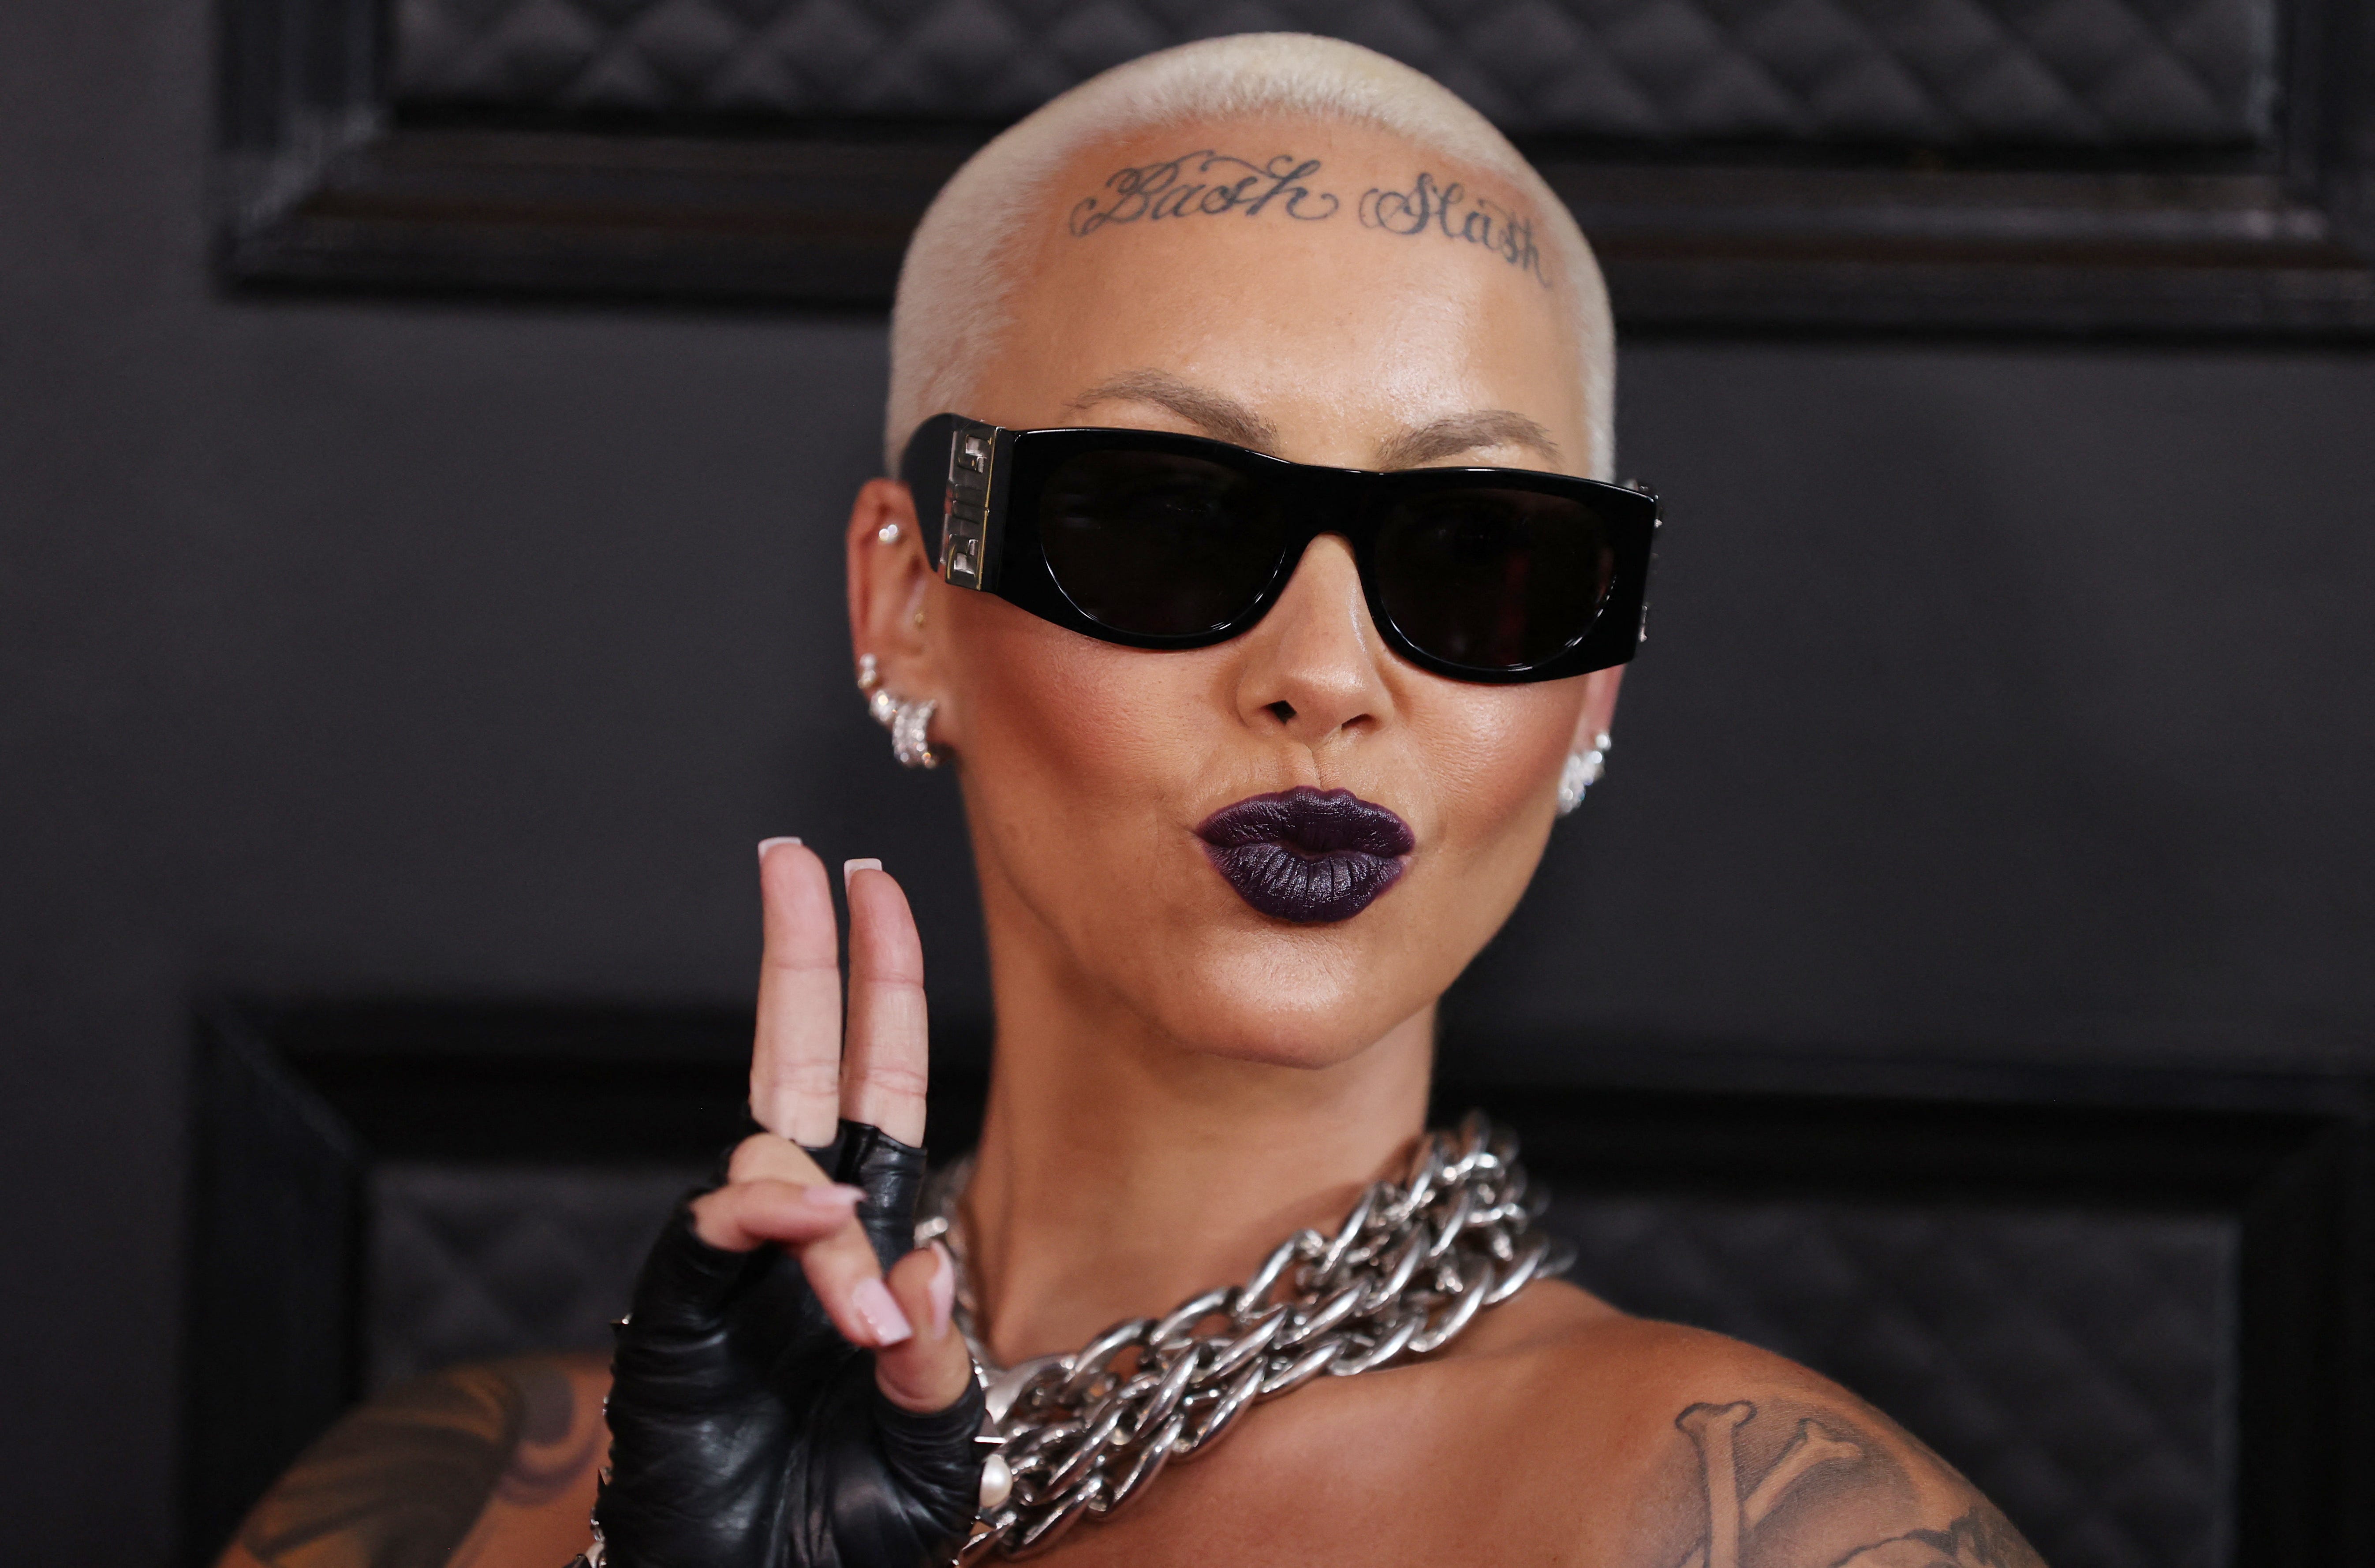 Who is Amber Rose? Model who once decried Trump will now speak at RNC